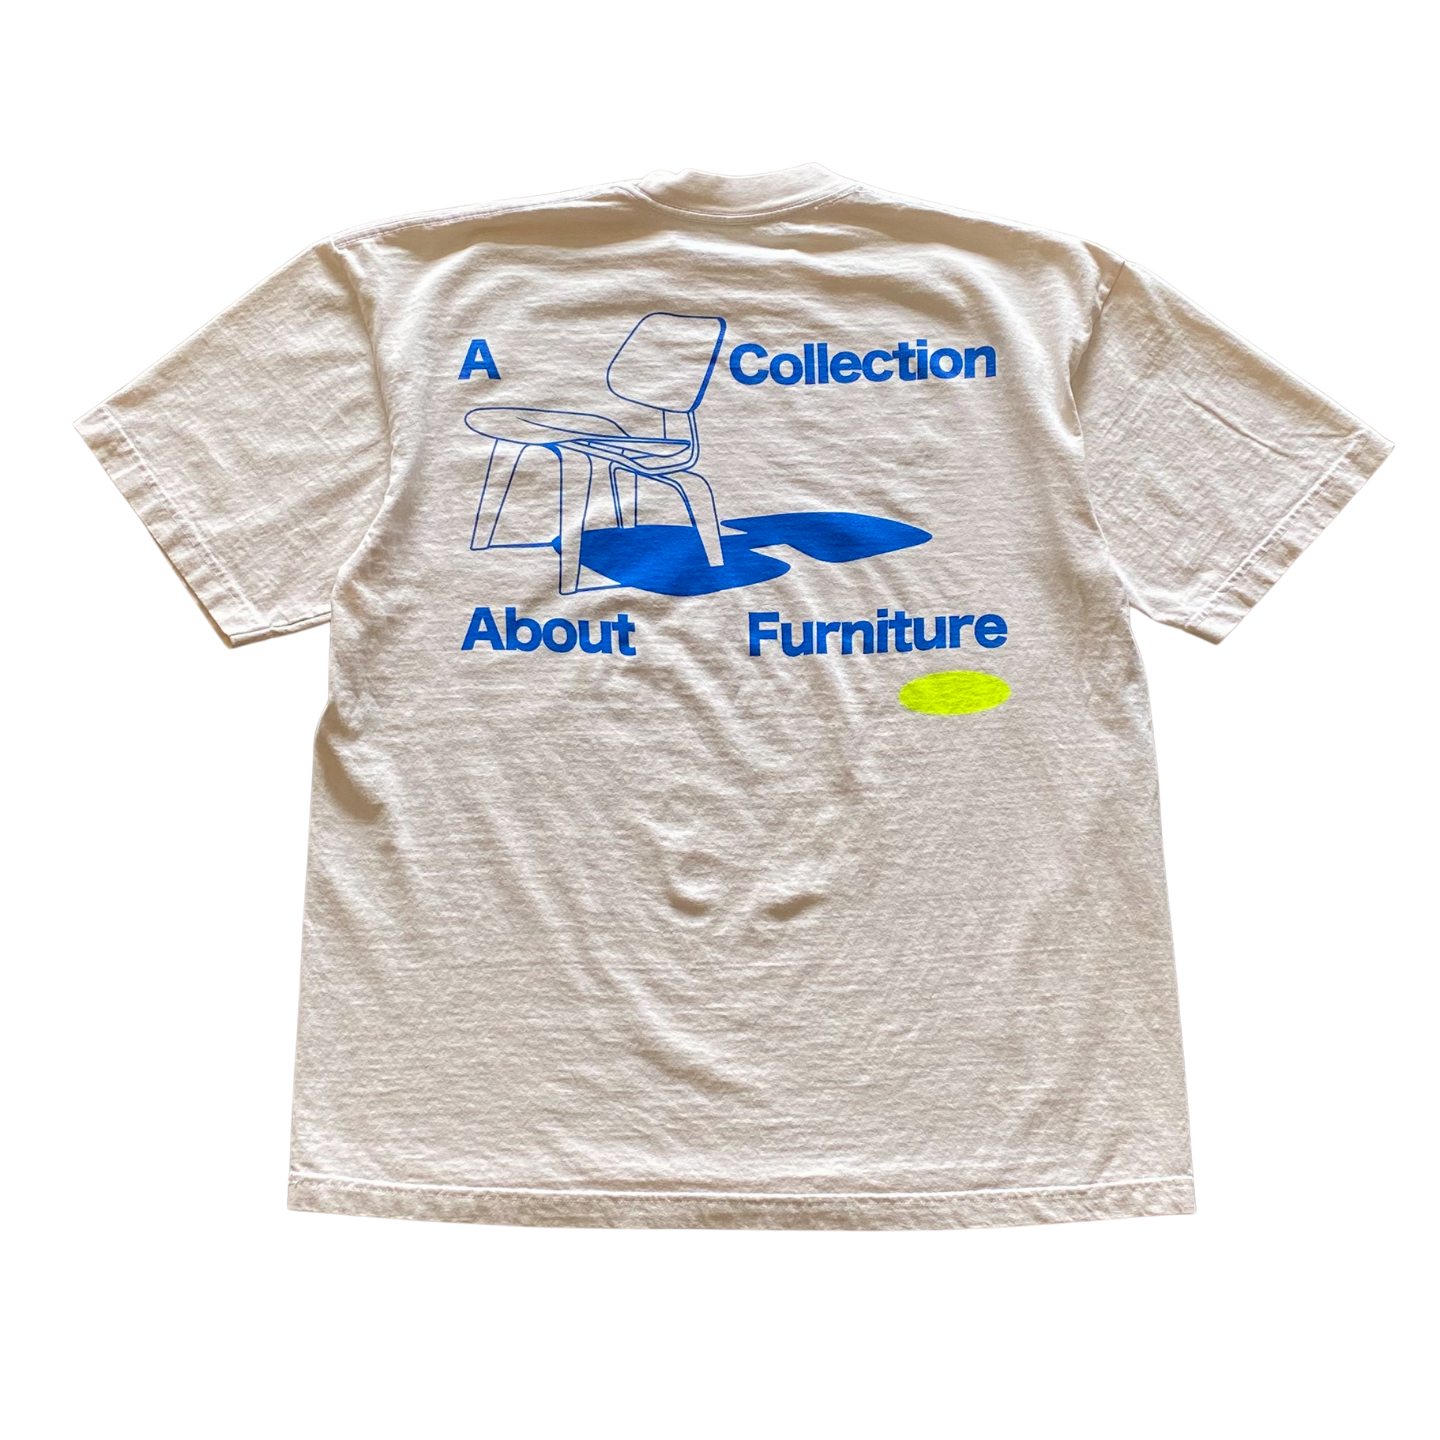 Furniture Collection Tee